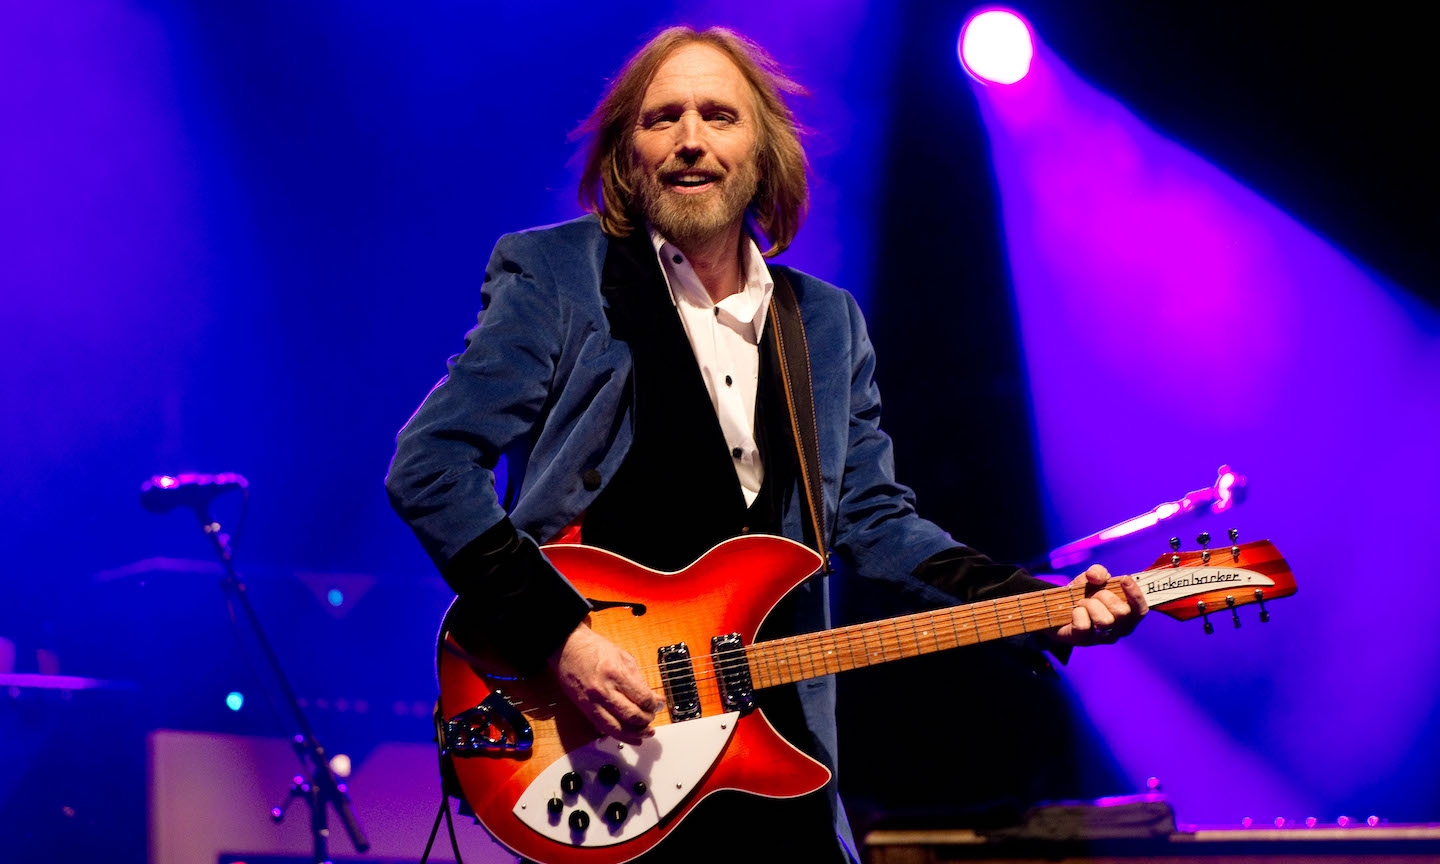 Tom Petty’s ‘Love Is A Lengthy Highway’ Featured In ‘GTA VI’ Trailer